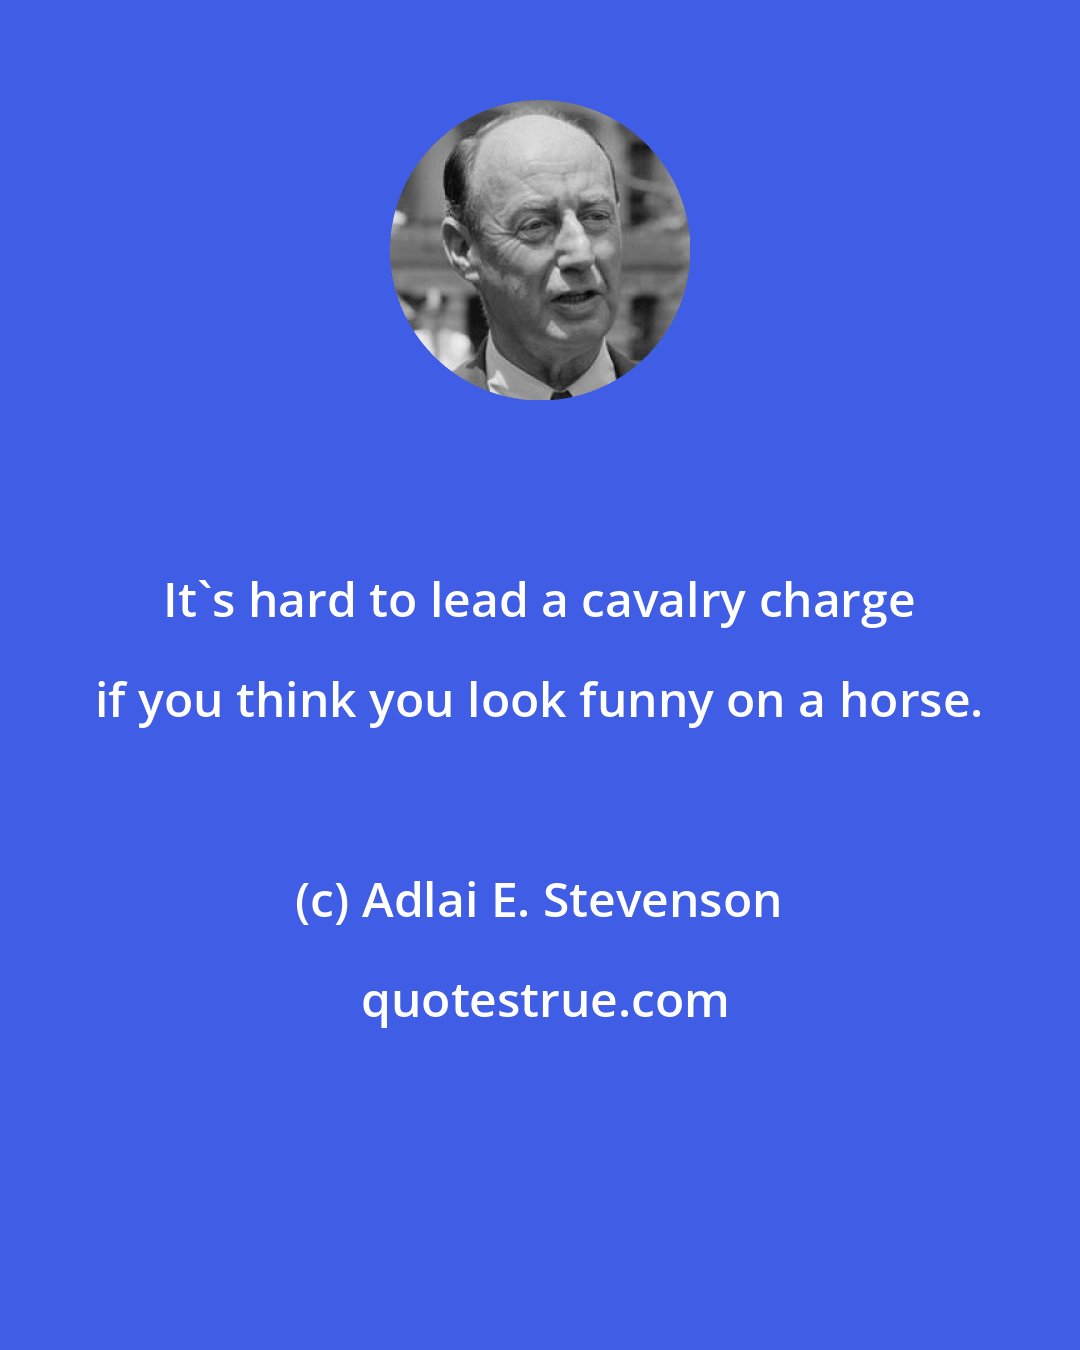 Adlai E. Stevenson: It's hard to lead a cavalry charge if you think you look funny on a horse.